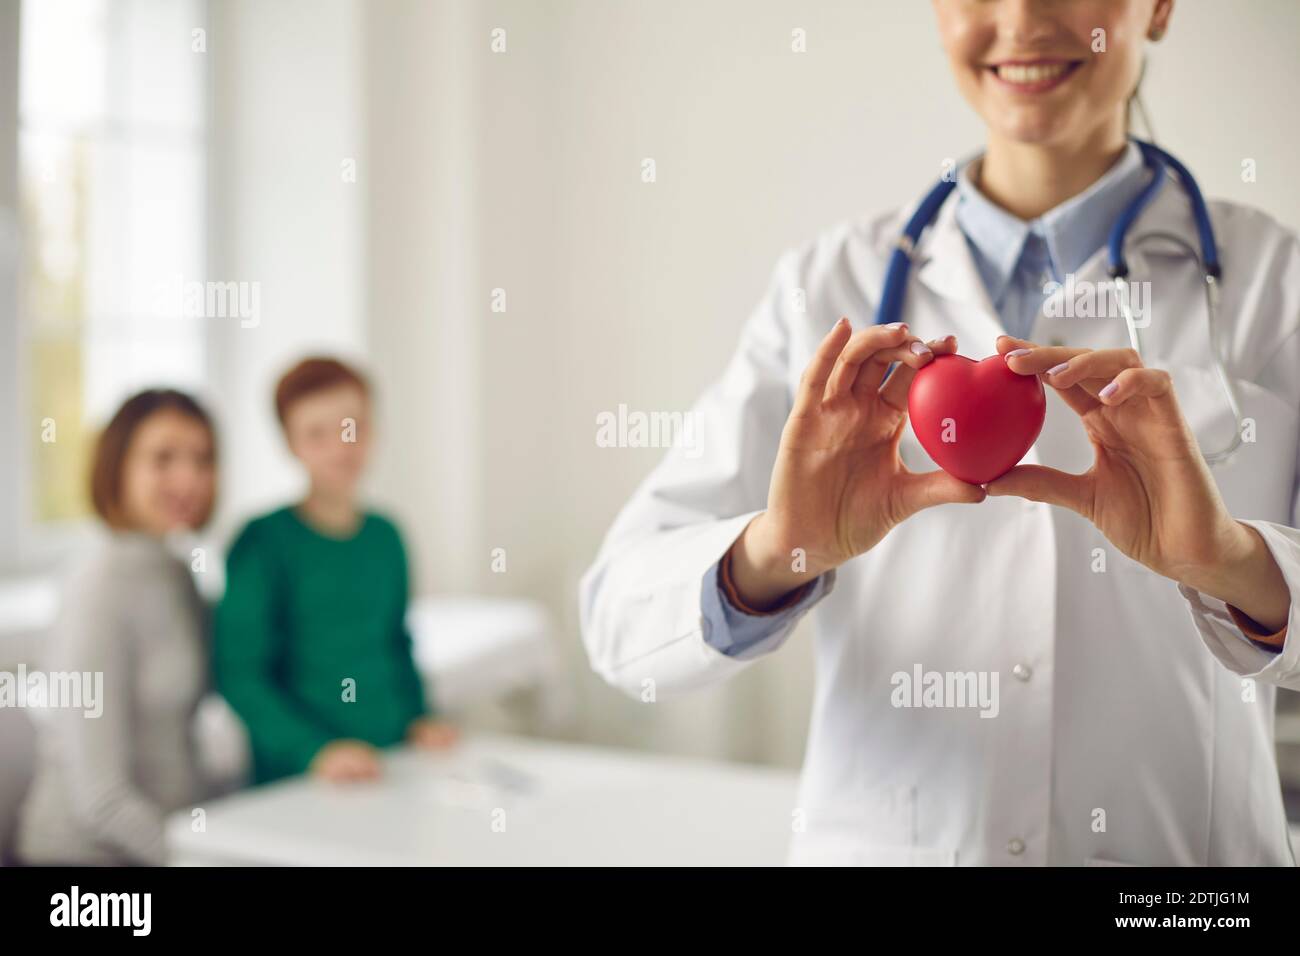 Family doctor holding red heart, promoting healthy lifestyle and disease prevention Stock Photo